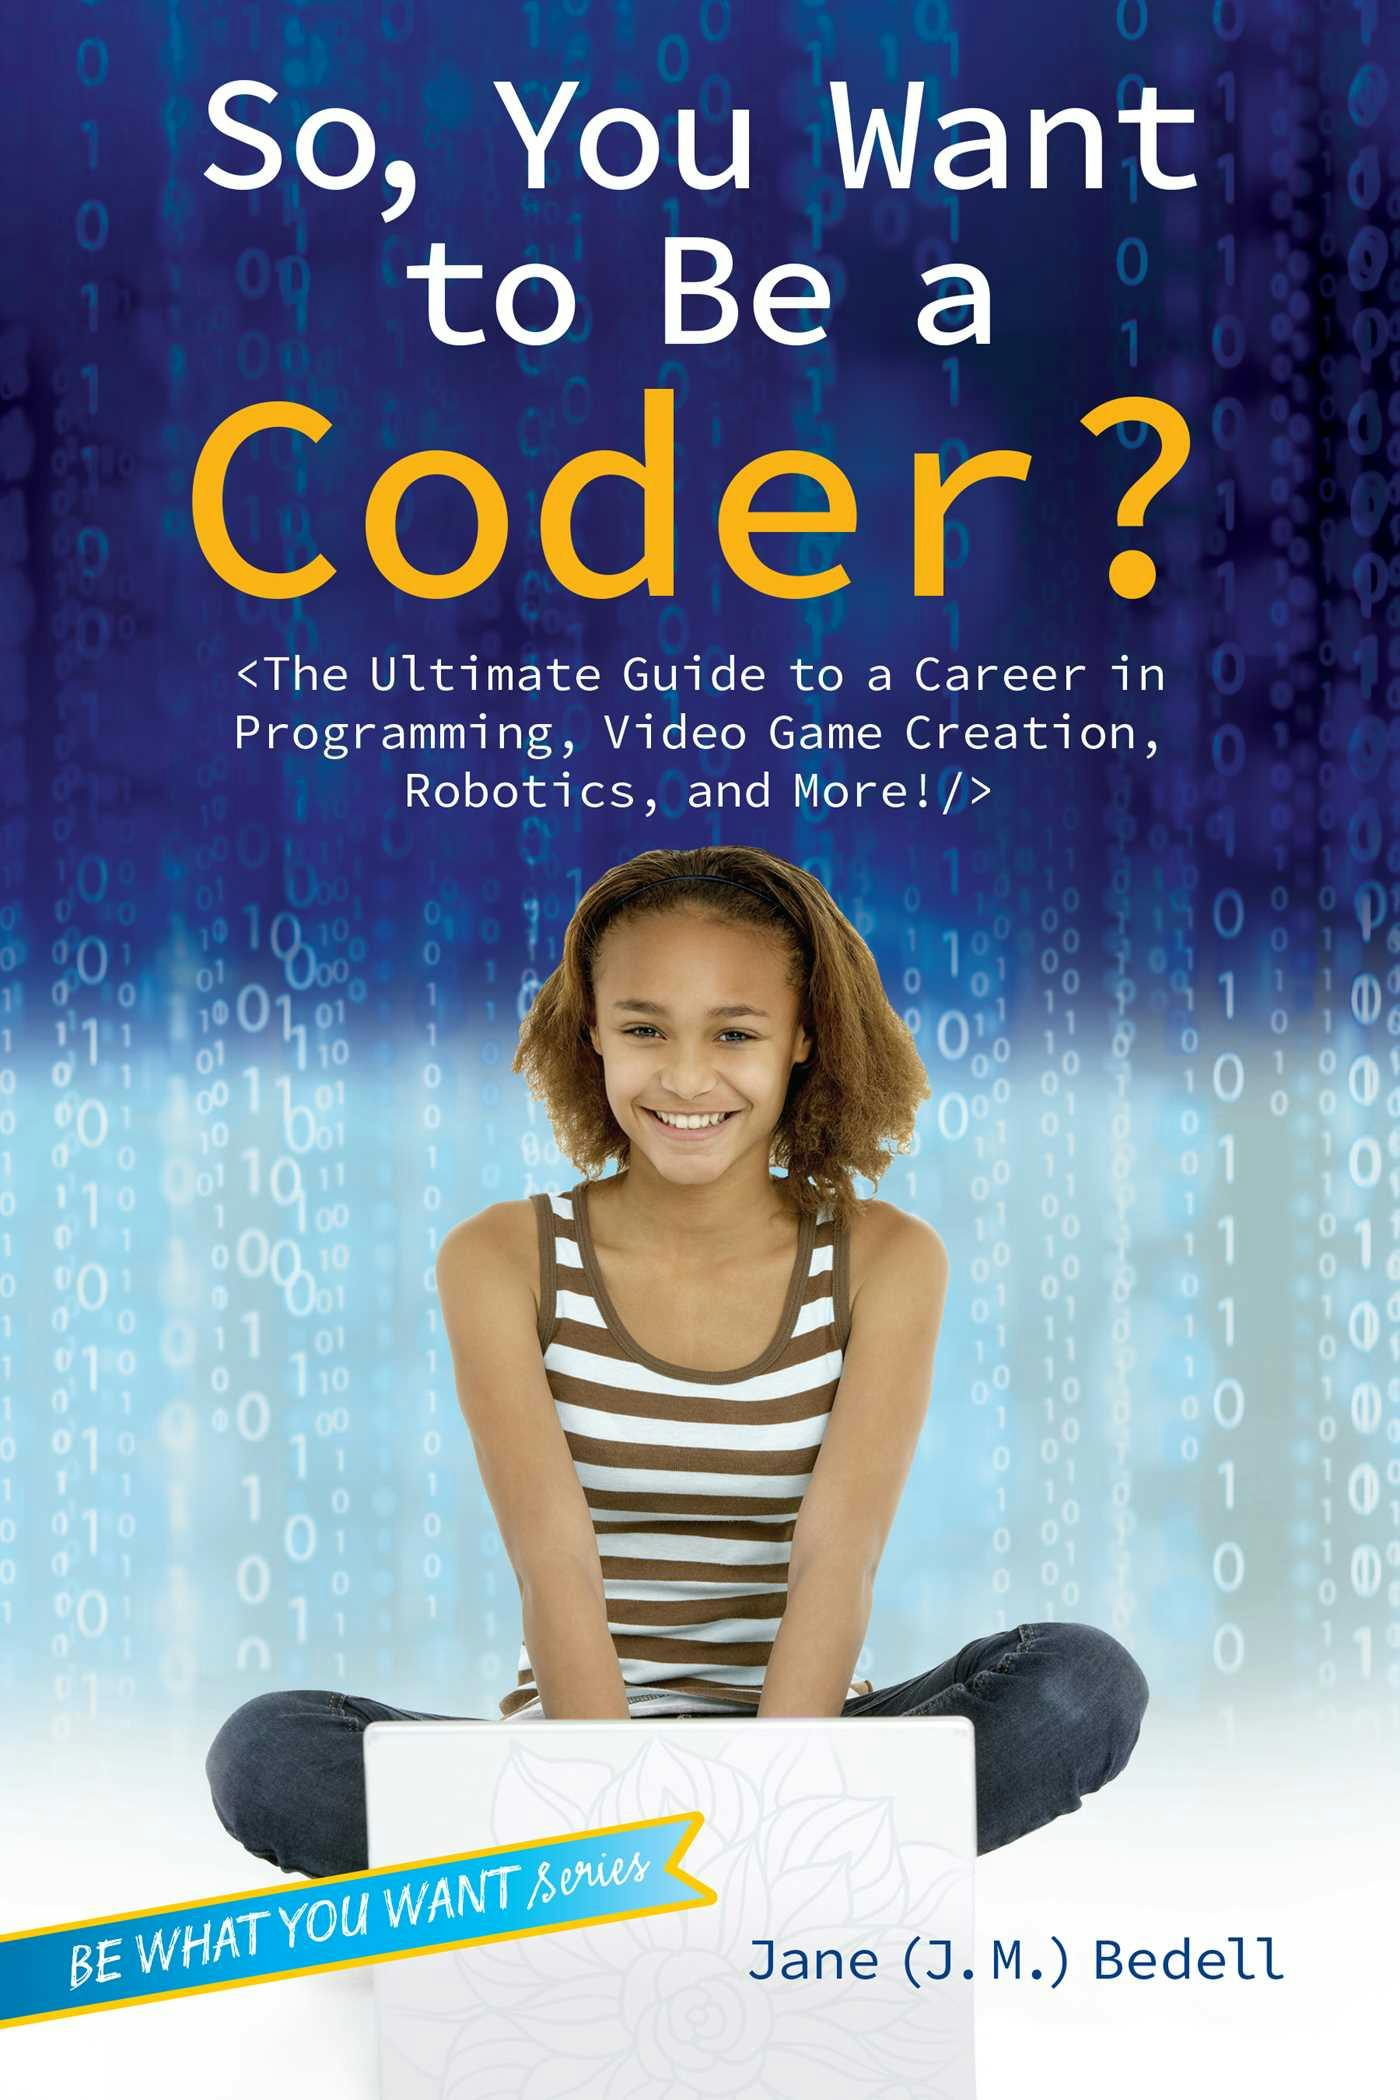 So, You Want to Be a Coder?: The Ultimate Guide to a Career in Programming, Video Game Creation, Robotics, and More! - Jane (J. M.) Bedell